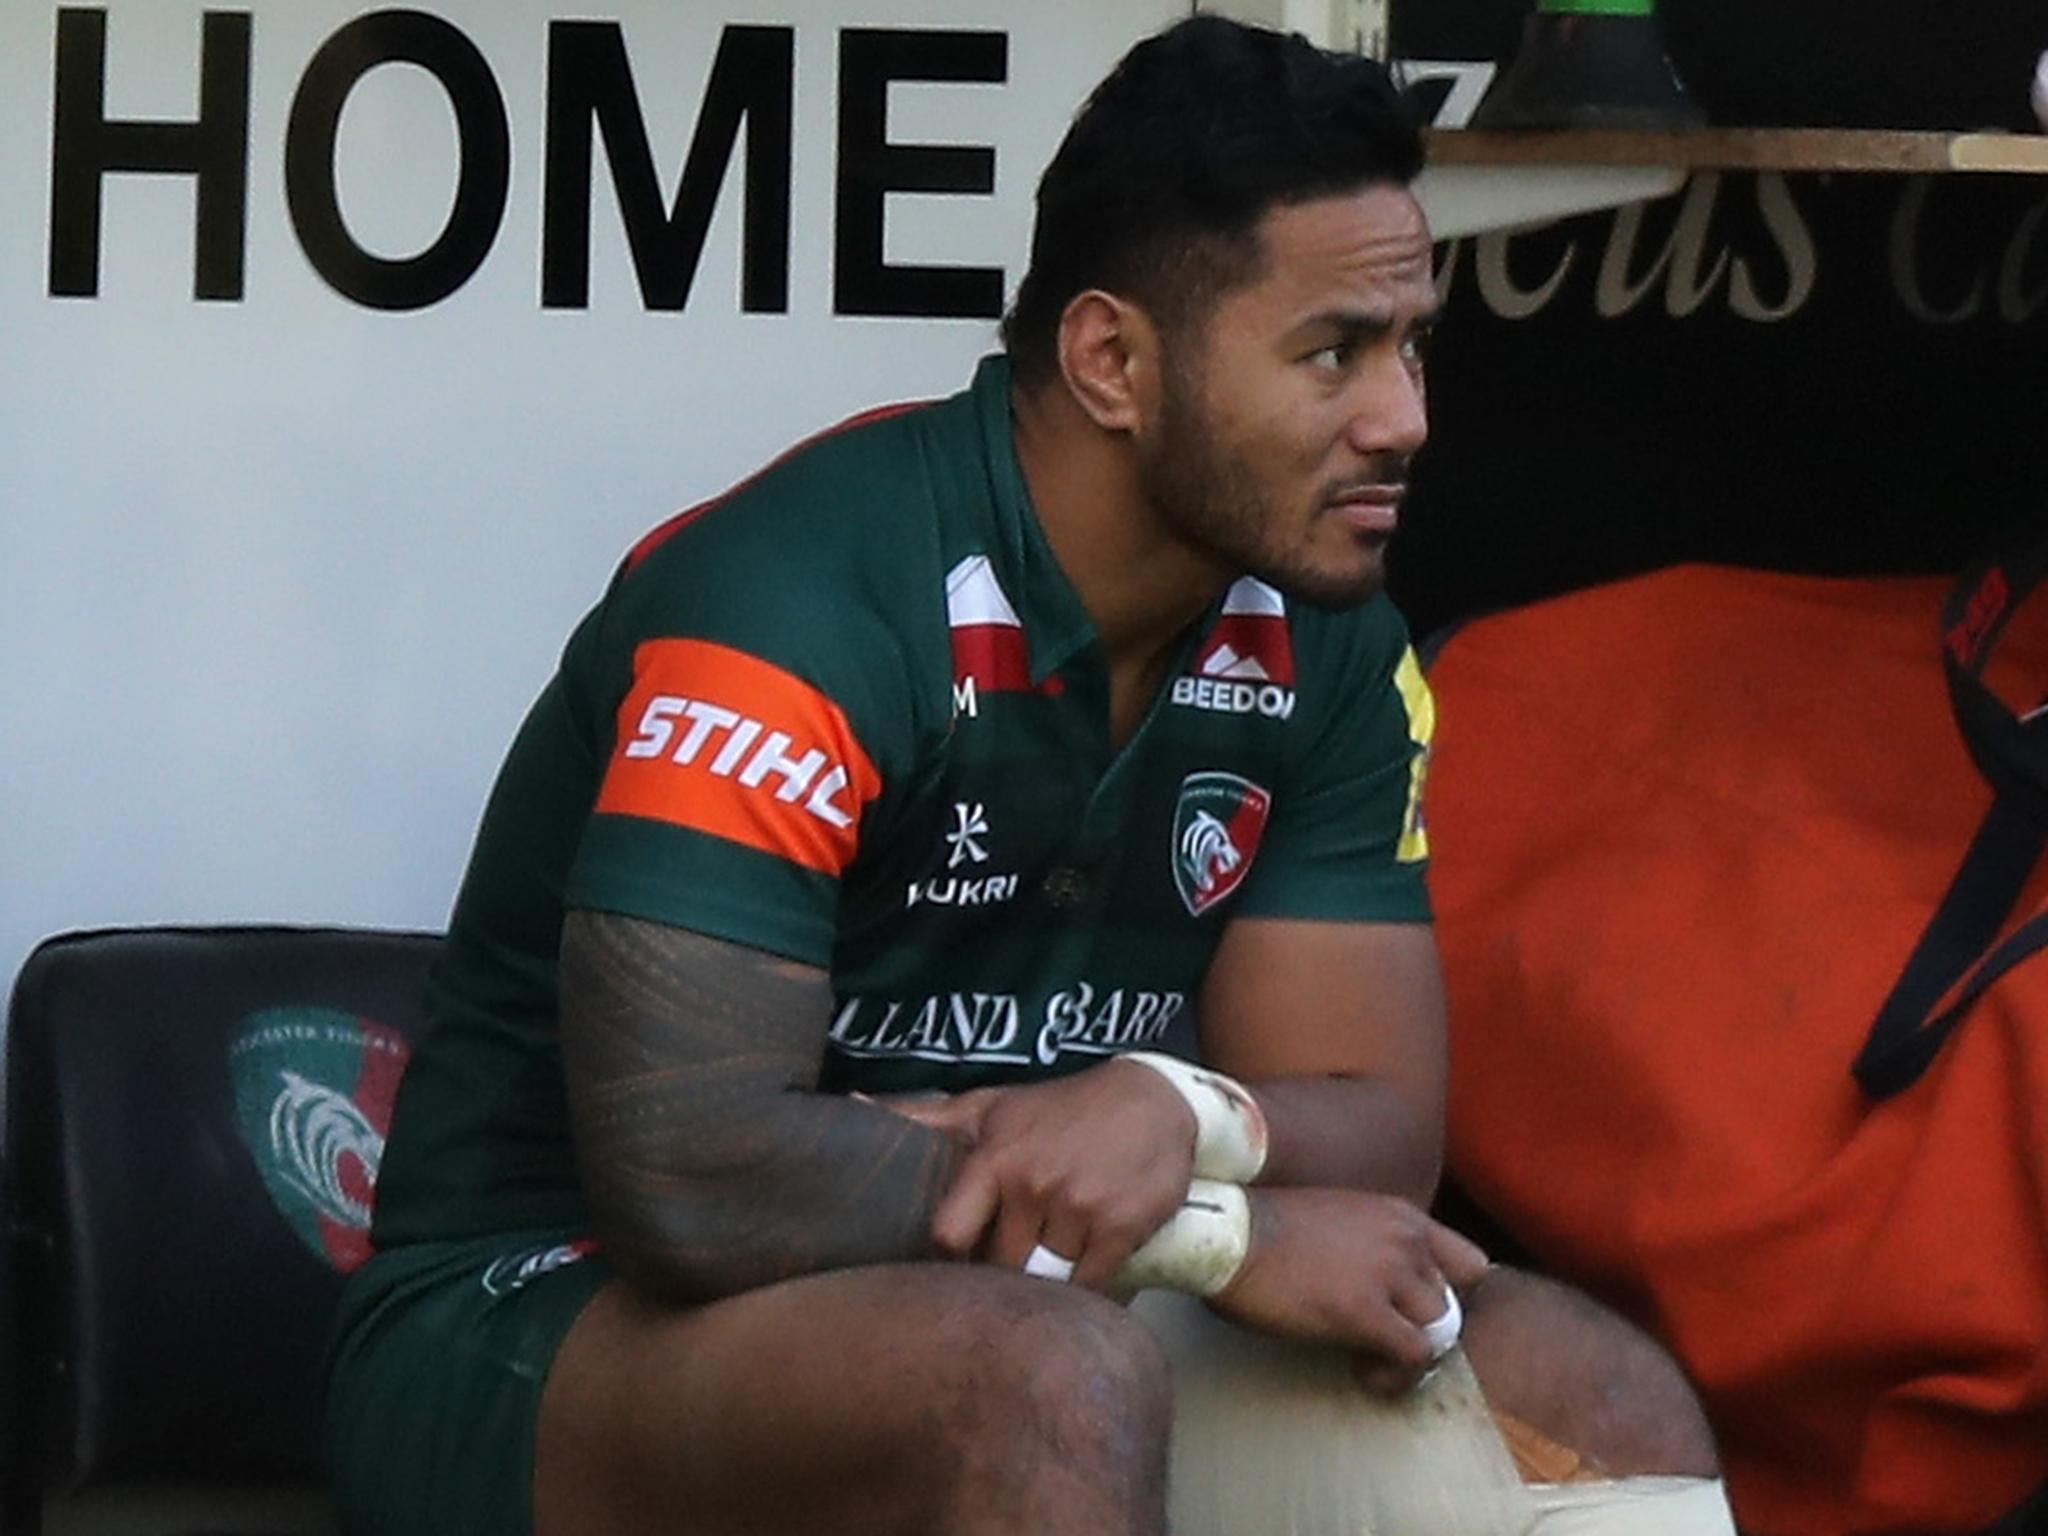 Manu Tuilagi returns from injury for Leicester Tigers' Premiership clash with Newcastle Falcons